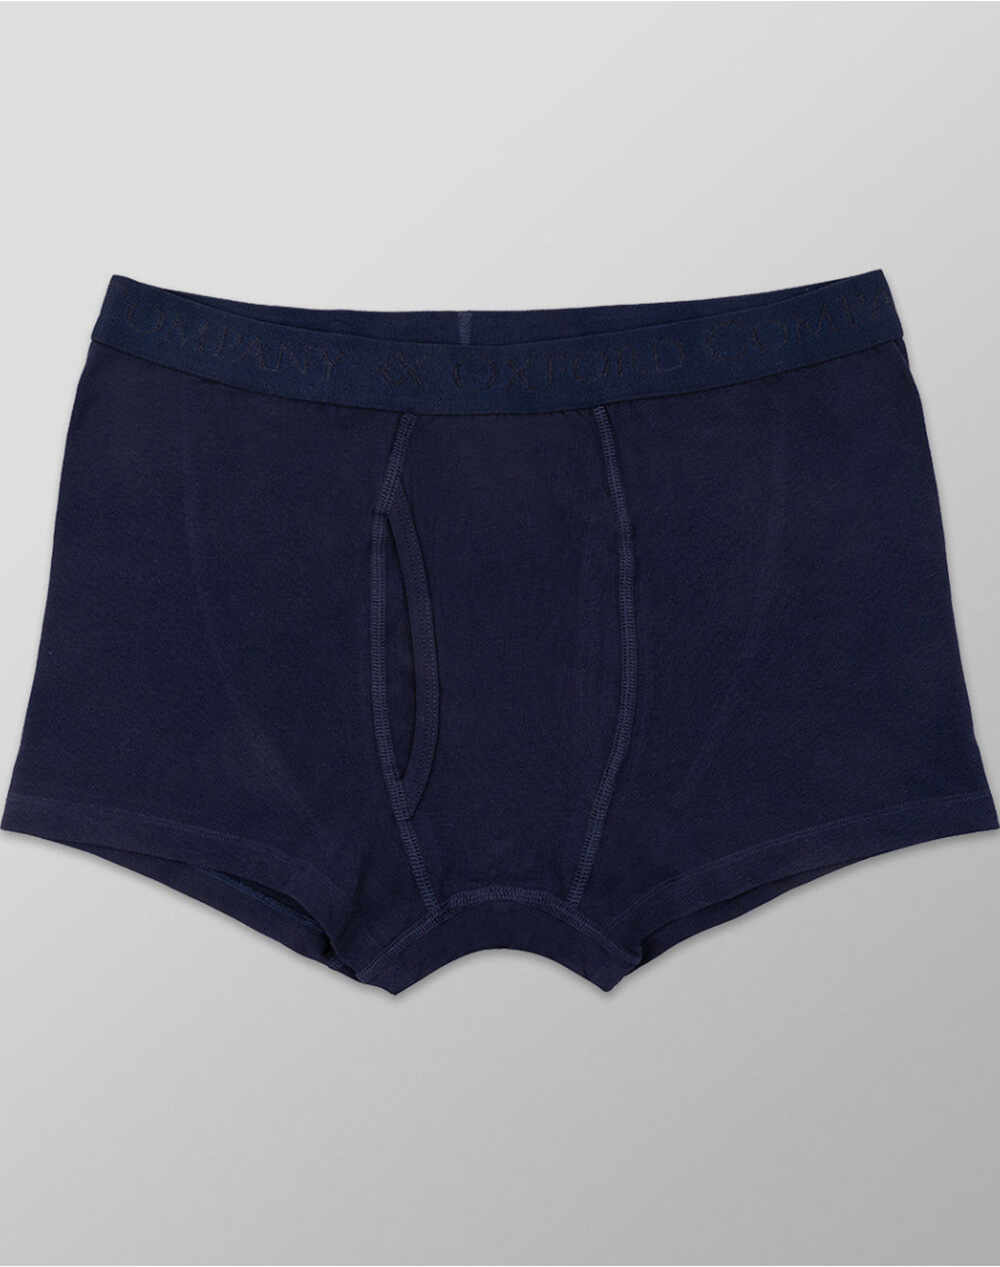 OXFORD COMPANY BOXER JERSEY LENJERIE INTINMA